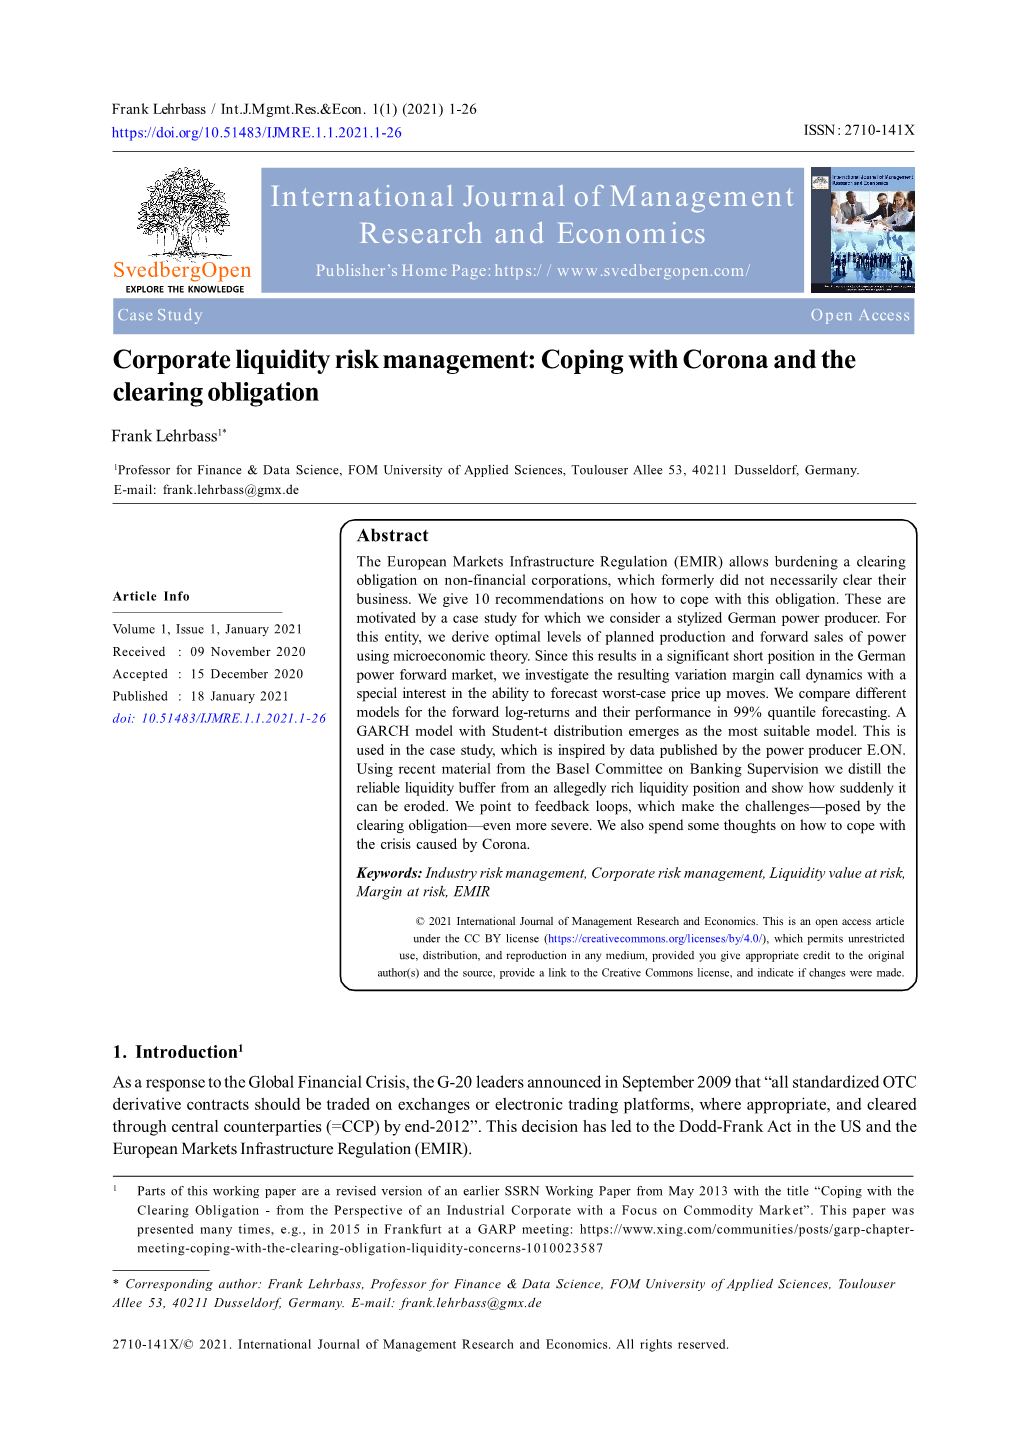 International Journal of Management Research and Economics